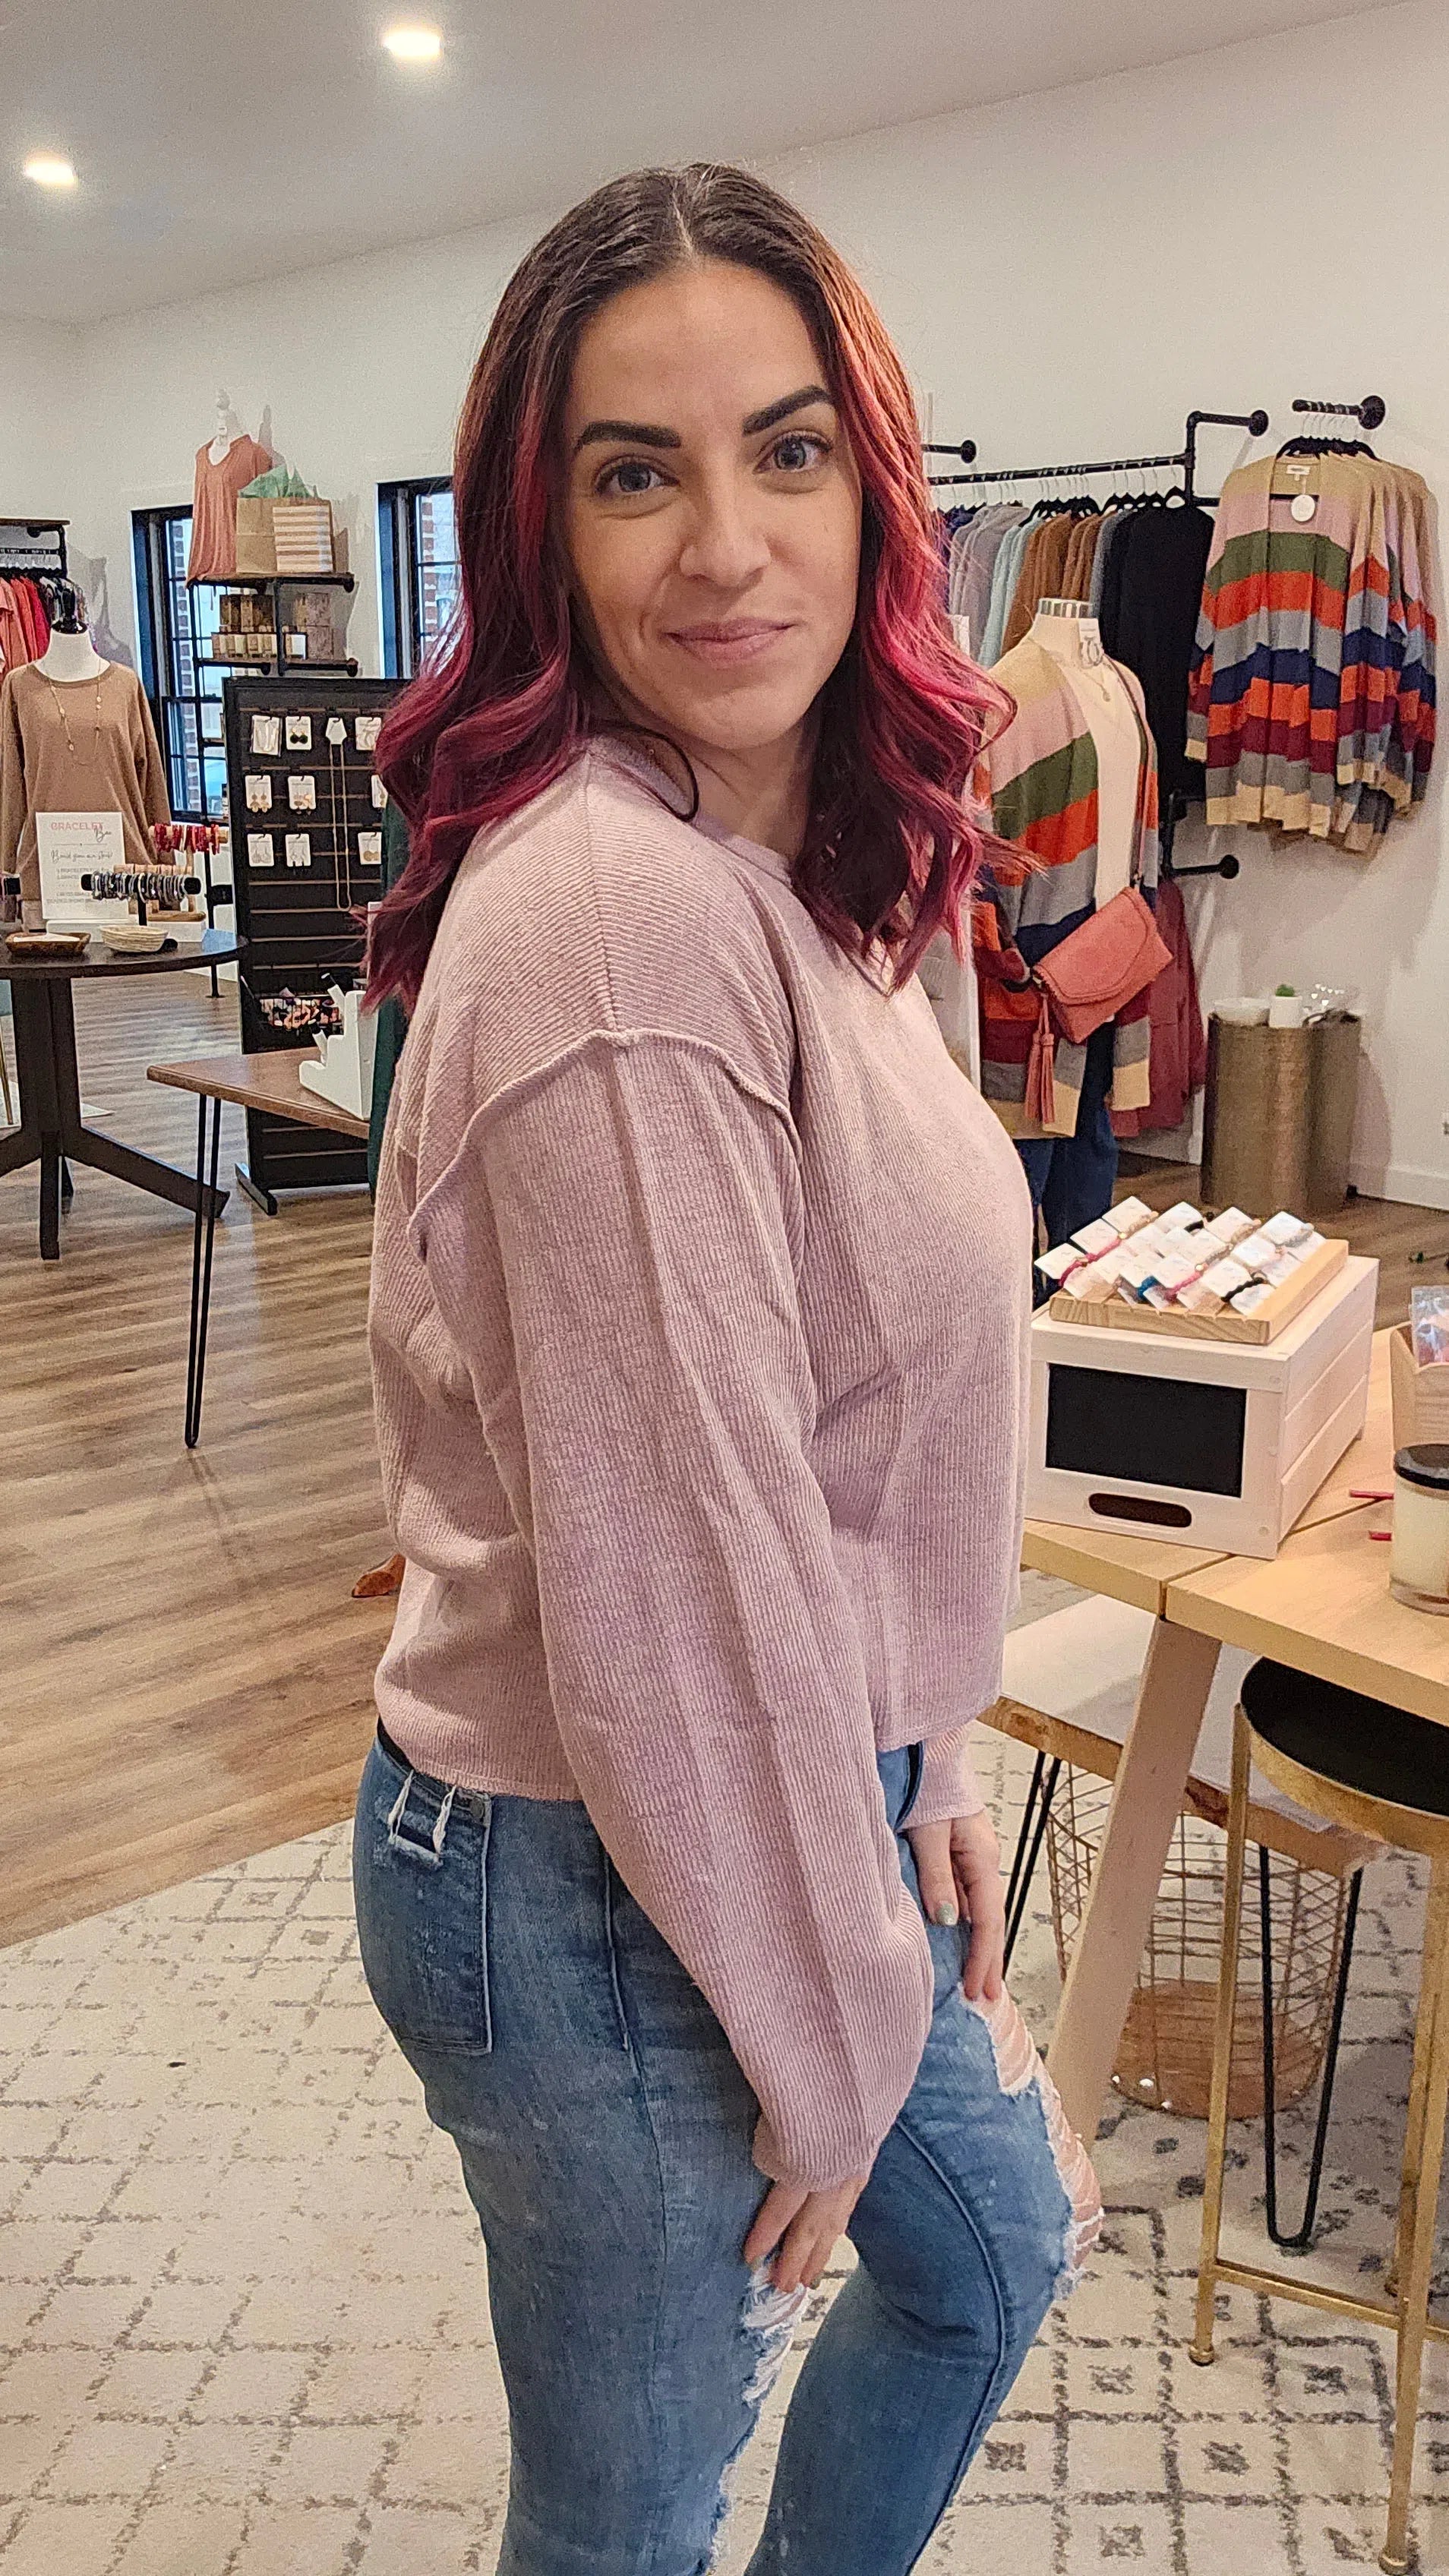 Shop Kayte V-Notch Top-Shirts & Tops at Ruby Joy Boutique, a Women's Clothing Store in Pickerington, Ohio